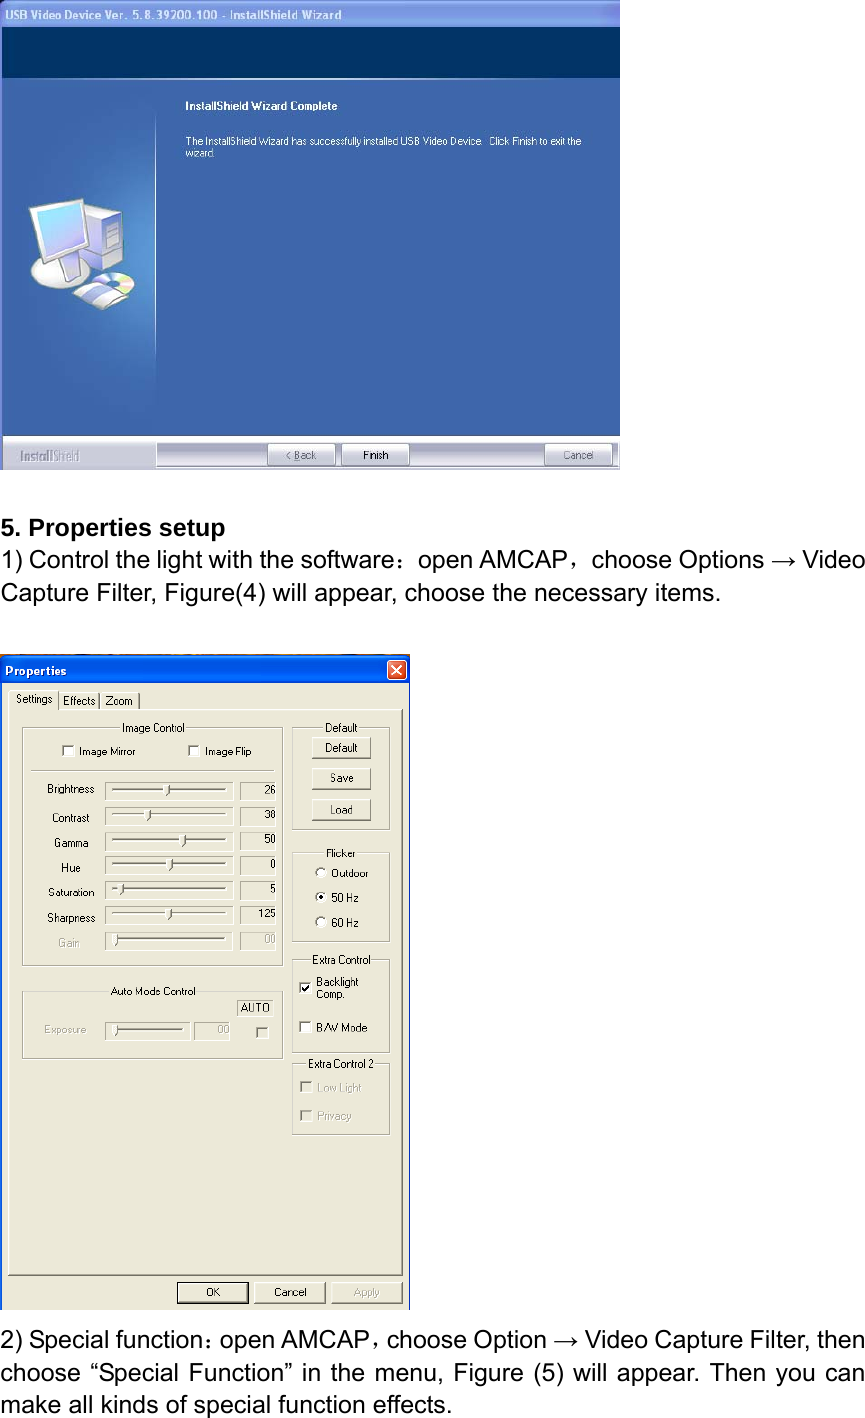   5. Properties setup 1) Control the light with the software：open AMCAP，choose Options → Video Capture Filter, Figure(4) will appear, choose the necessary items.   2) Special function：open AMCAP，choose Option → Video Capture Filter, then choose “Special Function” in the menu, Figure (5) will appear. Then you can make all kinds of special function effects.   